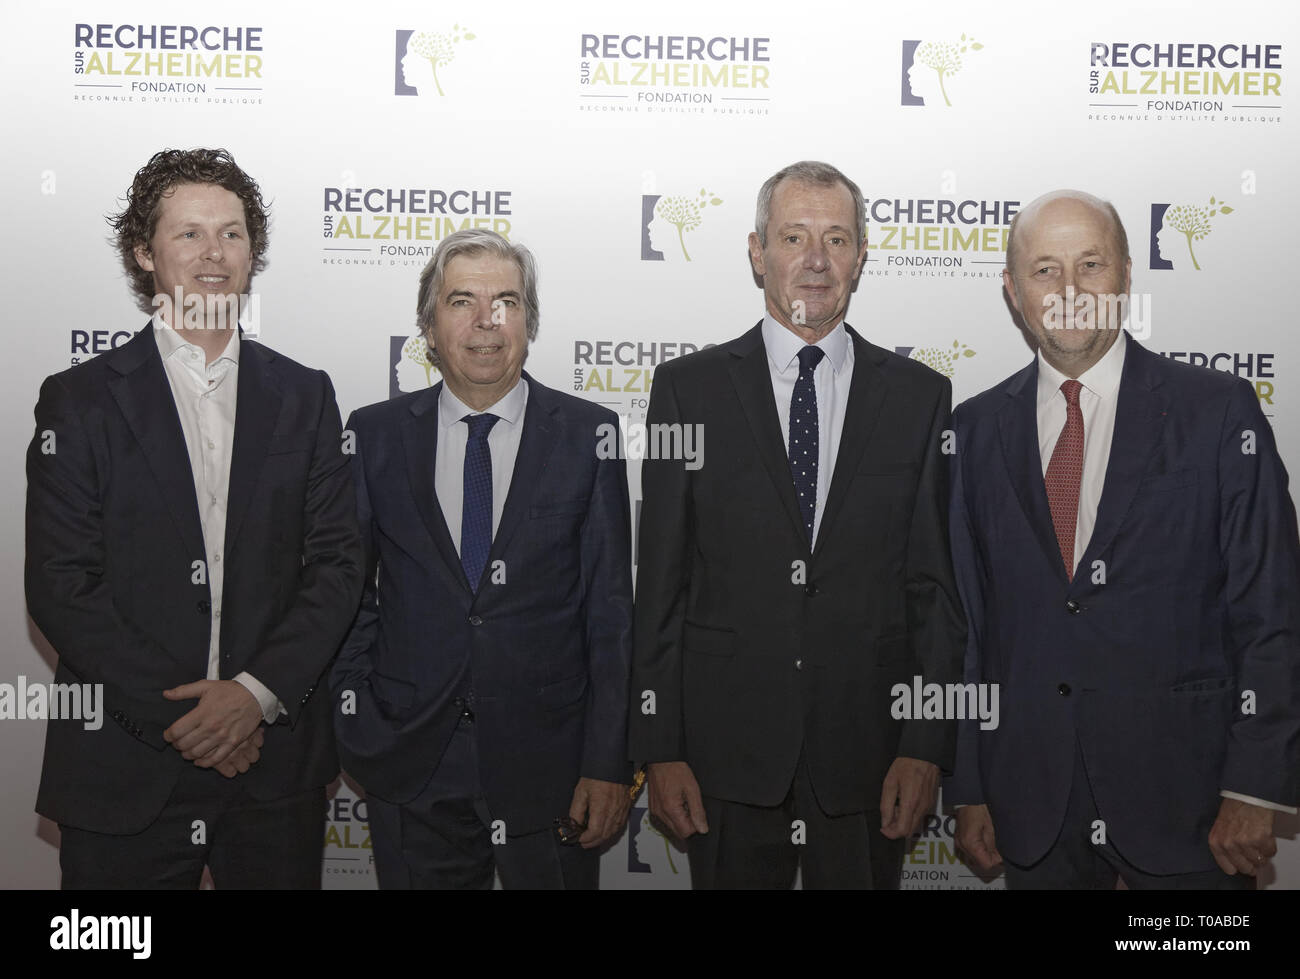 Paris, France. 18th Mar 2019. Dr Rik Ossenkoppele (L), Pr Bruno Dubois, Pr Ian McKeith and Olivier De Ladoucette (R) - Photocall of the 14th Gala 2019 of the Association for Alzheimer Research at the Olympia in Paris on March 18, 2019, France Credit: Véronique PHITOUSSI/Alamy Live News Stock Photo